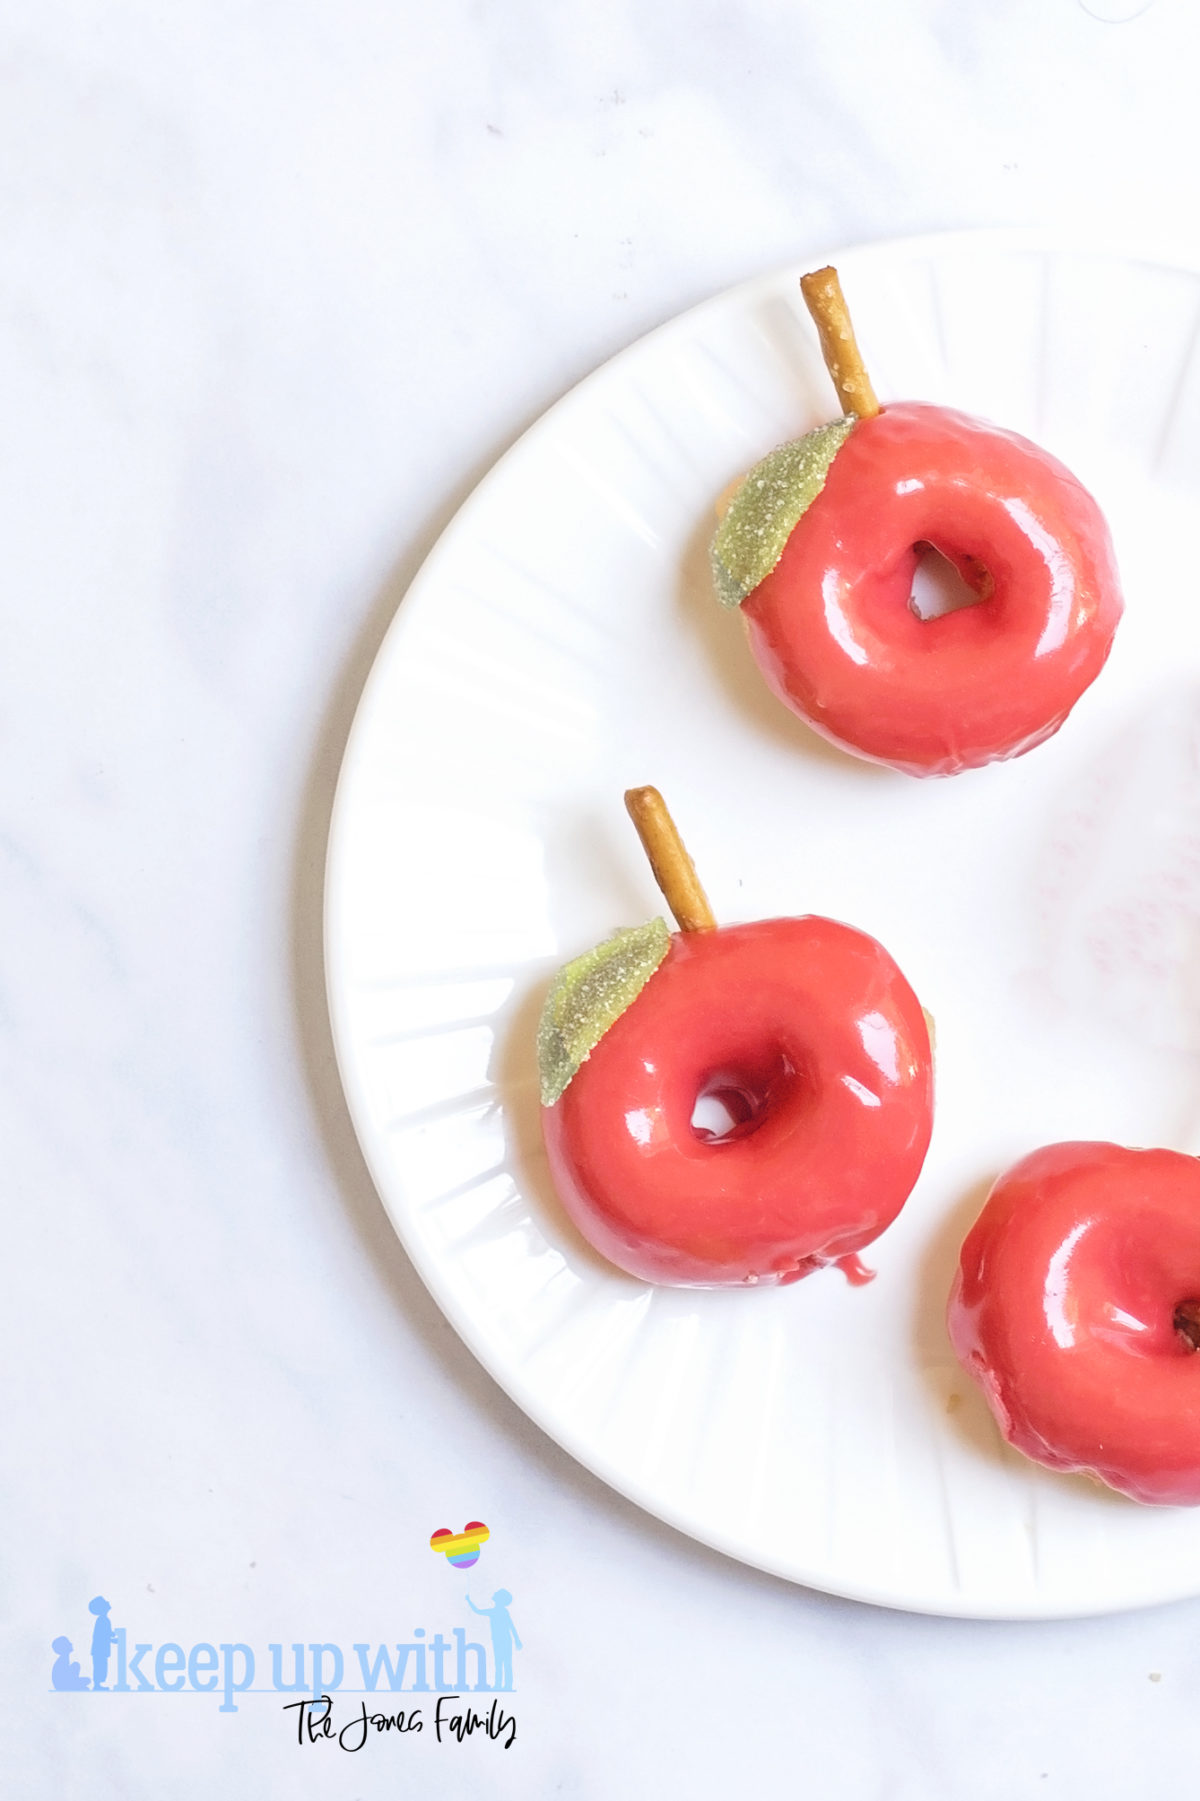 Image shows red apple shaped Back to School Doughnuts on a white Vera Wang plate, sitting on a white marble surface. Image by Sara-Jayne from Keep Up With The Jones Family.